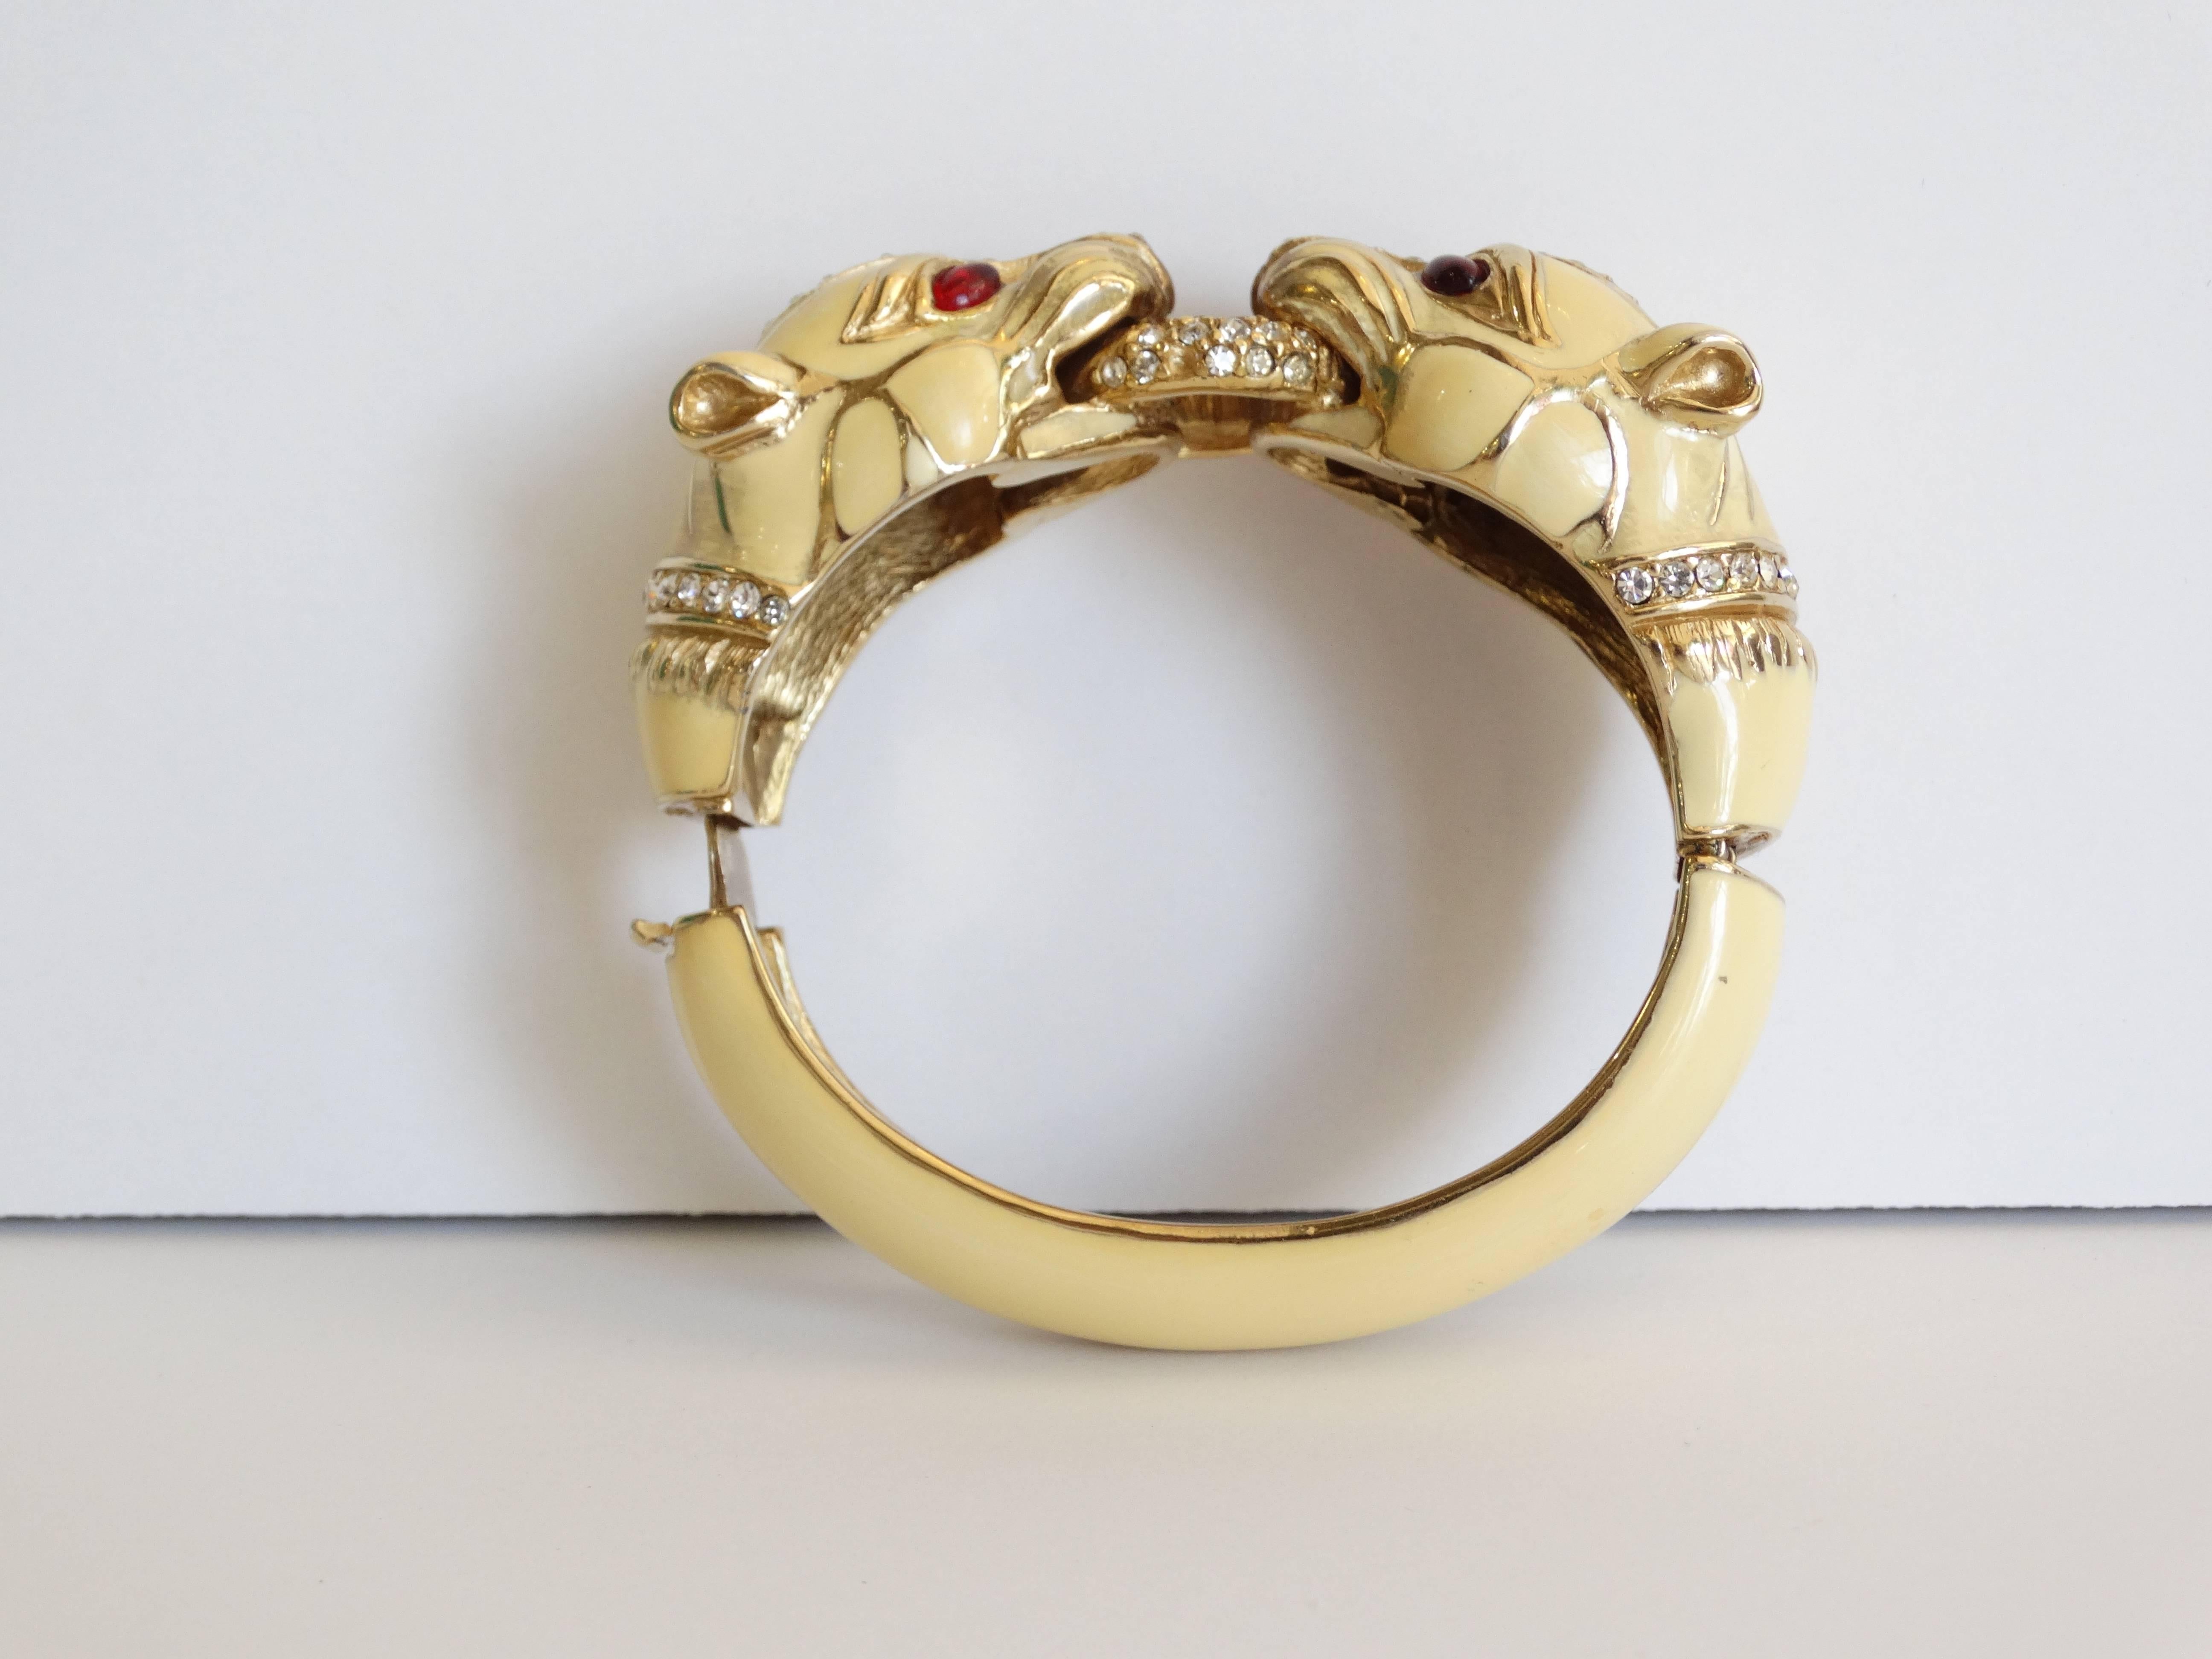 This fabulous Ciner enameled bracelet in cream is from the 1970s . It has double Panther heads that are encrusted with Swarovski Crystal jewels. Center Swarovski crystal o-ring,  Eyes are red cameo glass. Closure is a clamper style. The inside